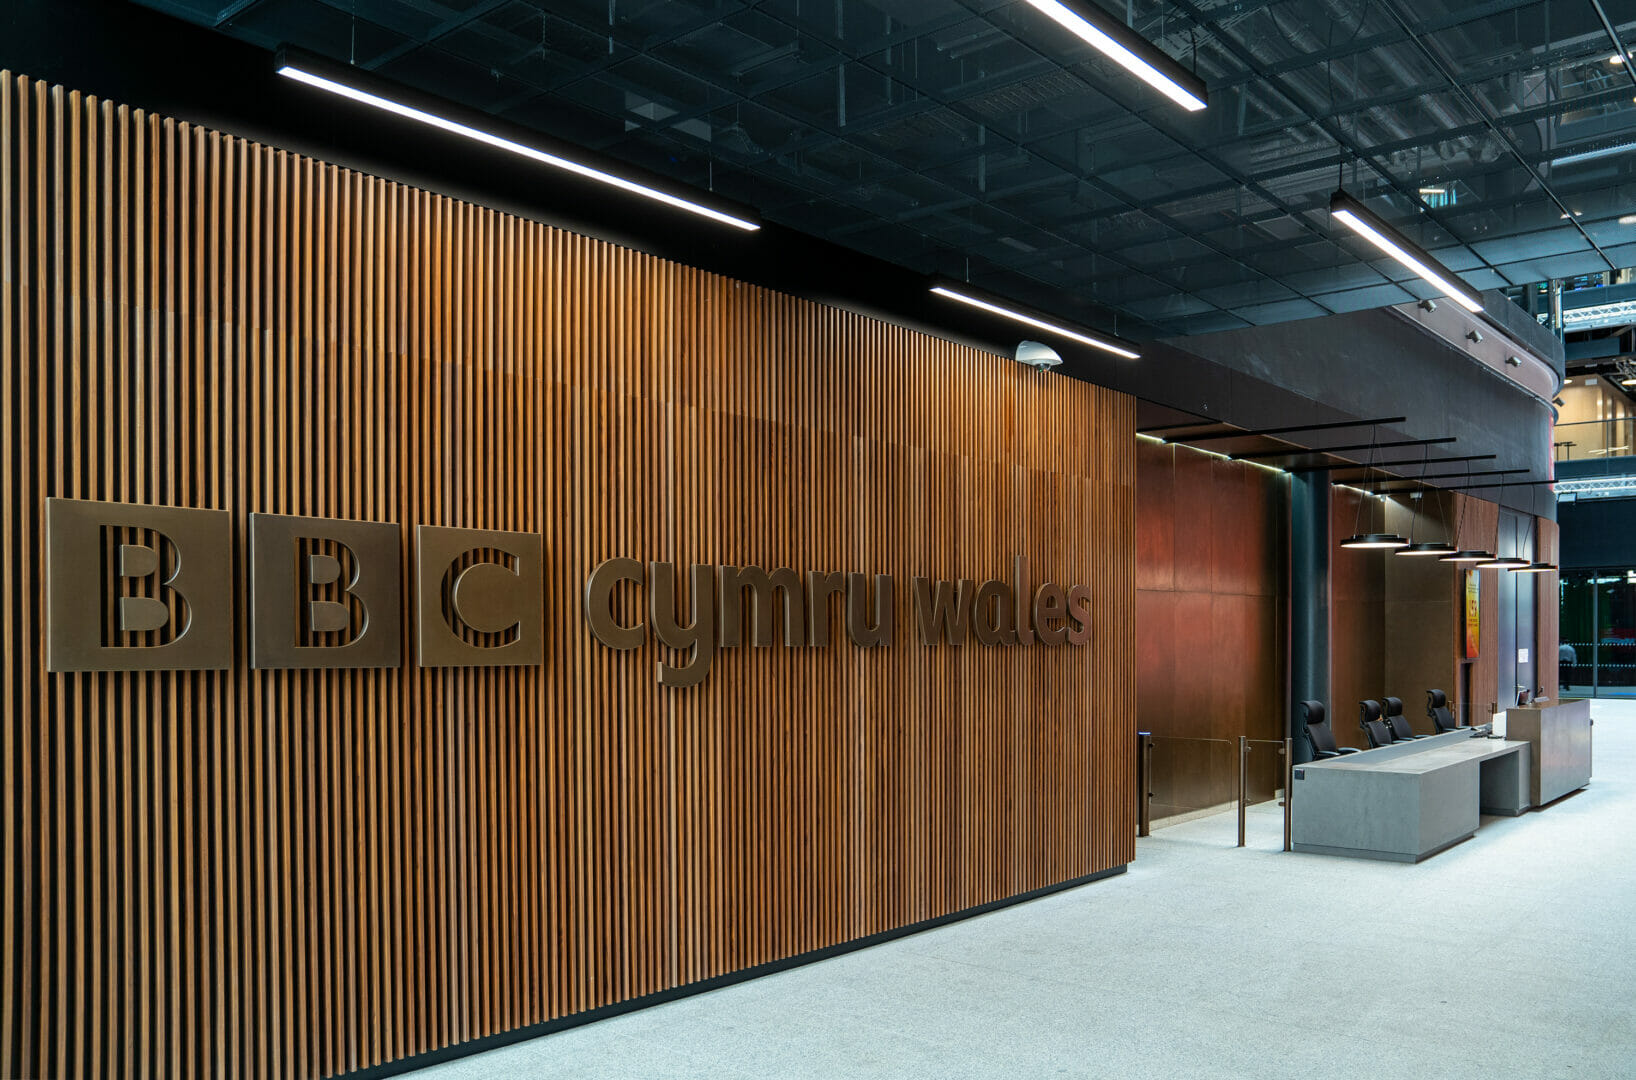 STAFF MOVE INTO BBC’S NEW BROADCAST CENTRE  AT LEGAL & GENERAL’S CARDIFF REGENERATION PROJECT  @BBCWales